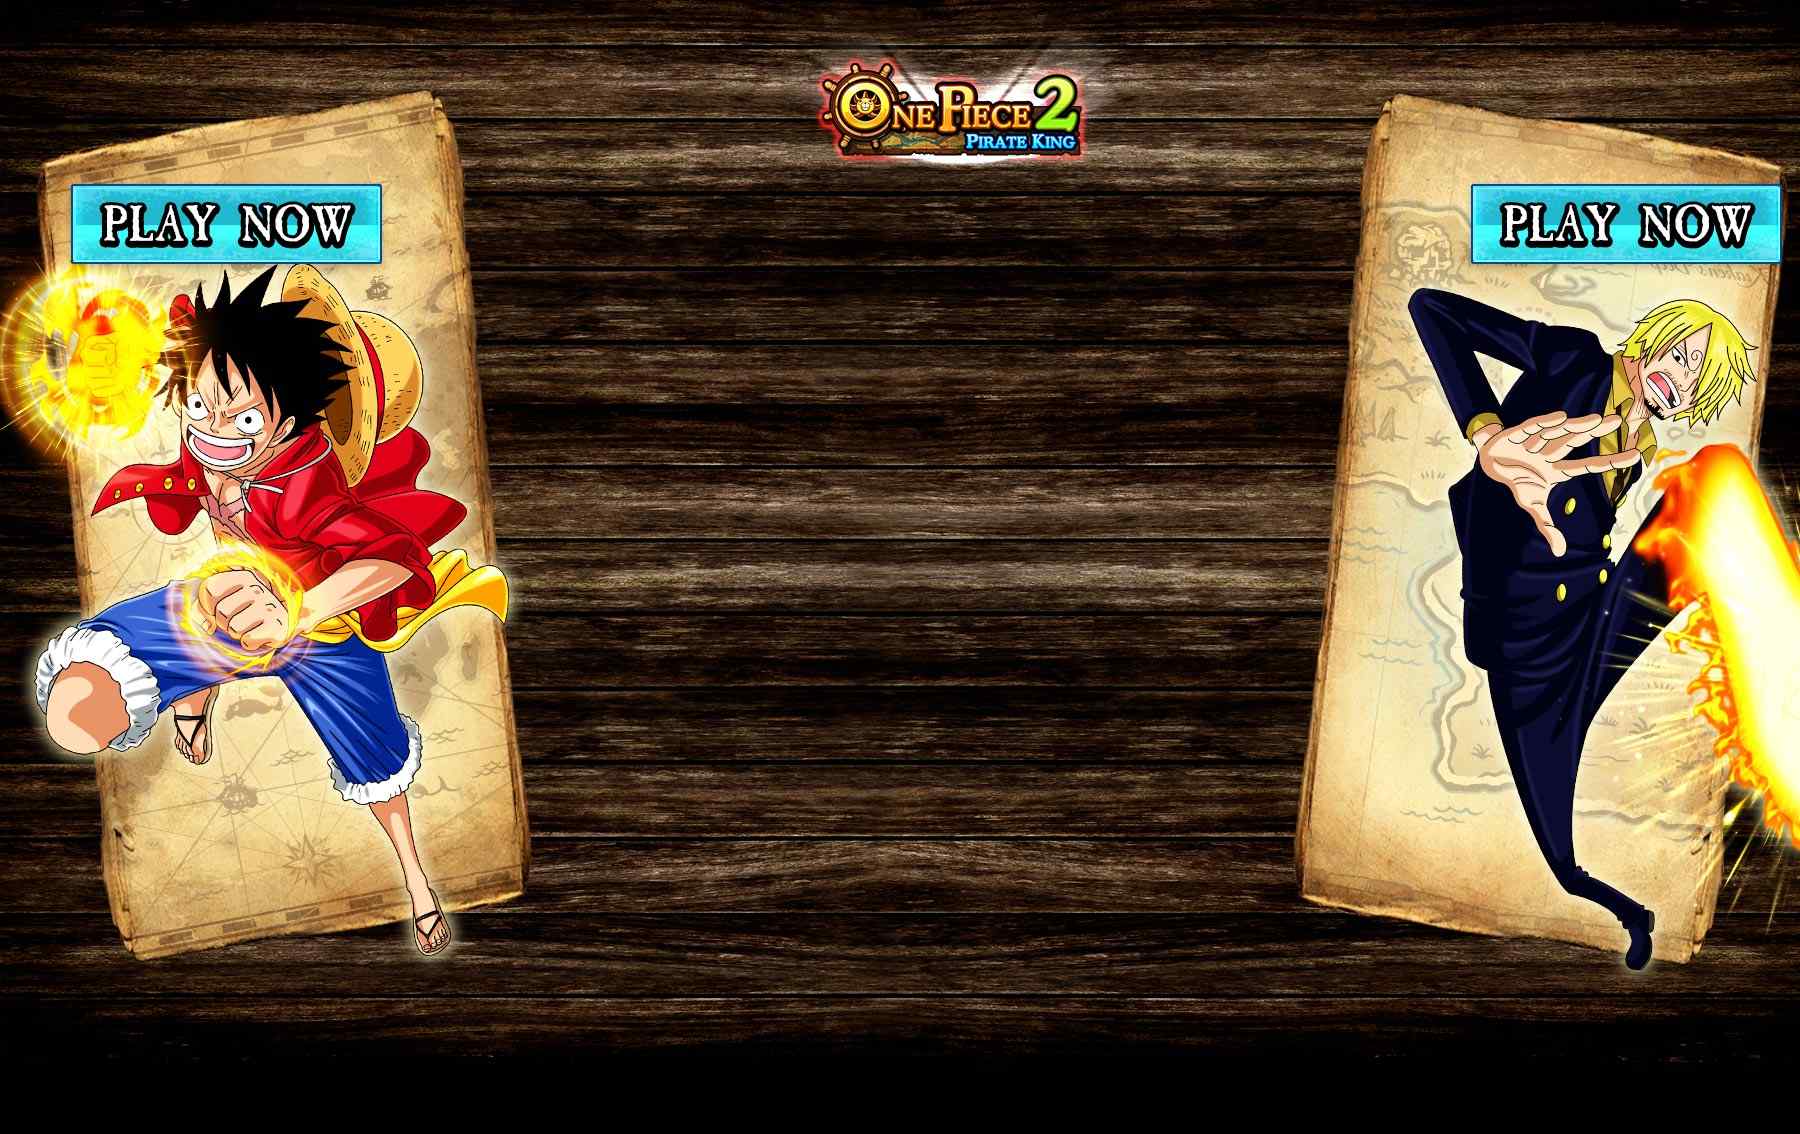 One piece online 2 pirate king